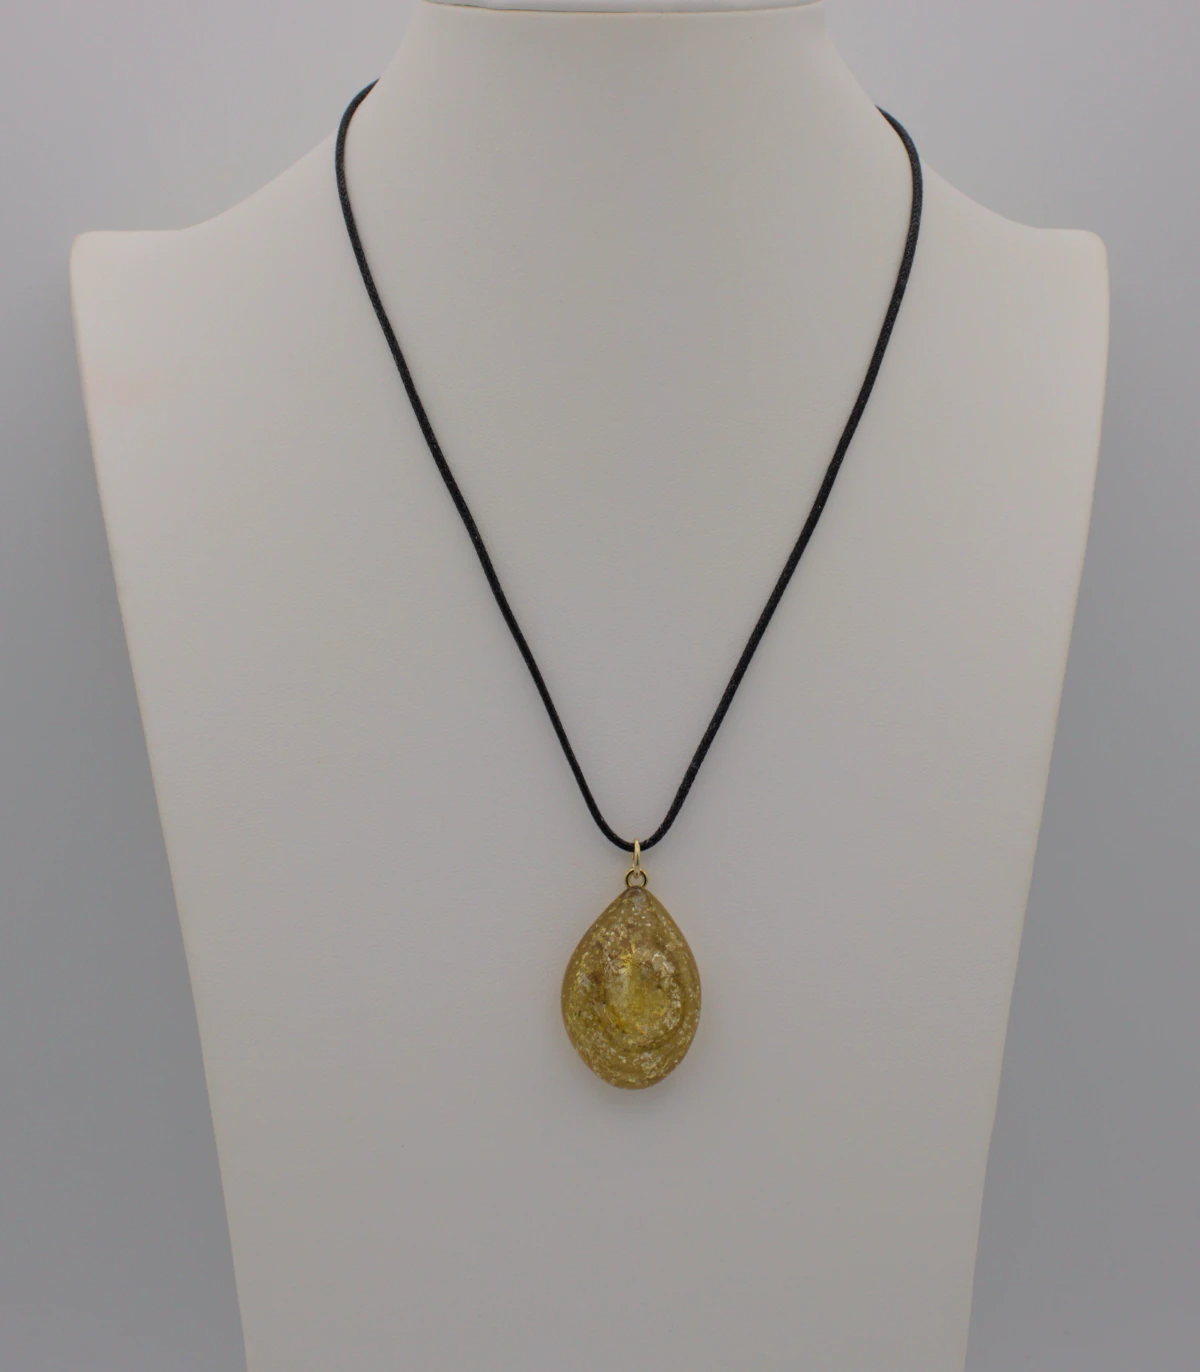 Golden tones swirls of Murano glass gold infused pendant on a black cotton cord